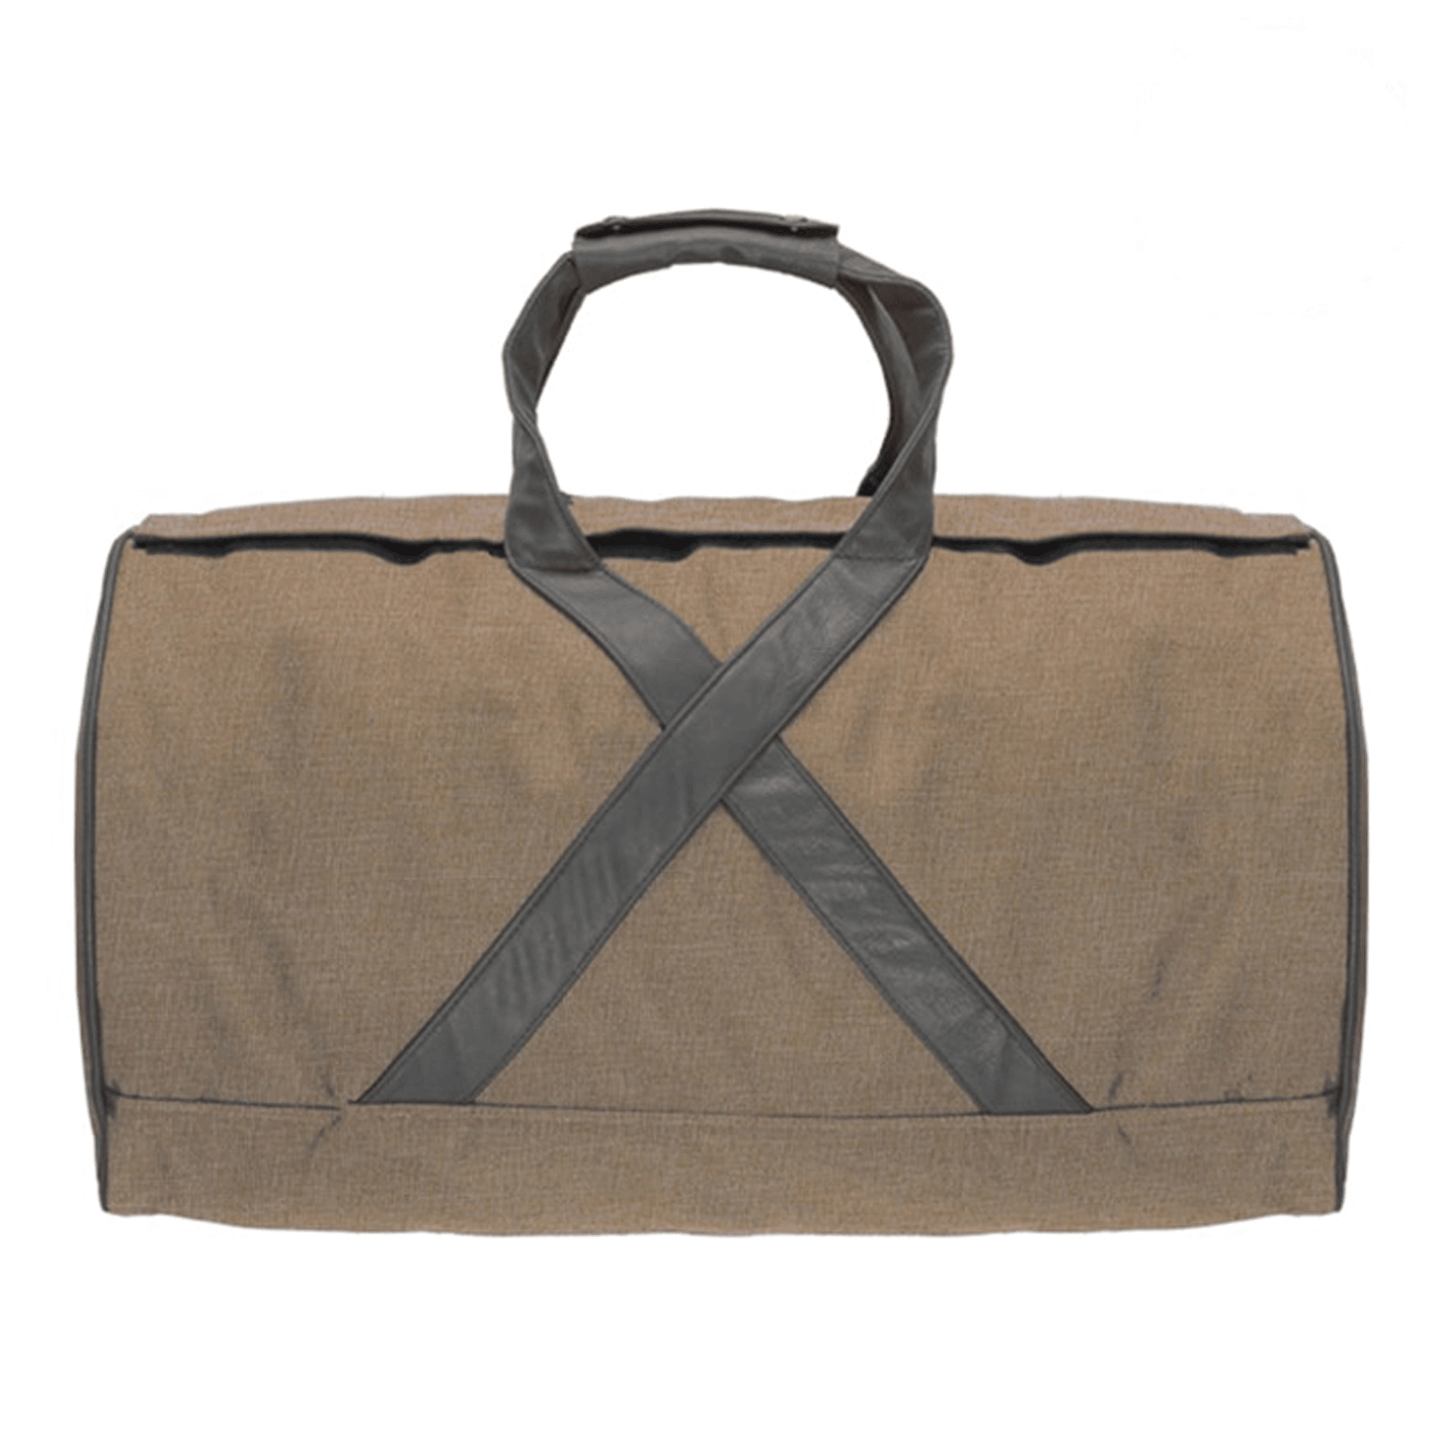 AWOL DAILY Large Brown Duffle Bag 886142 Harvest & Extraction 853336007881